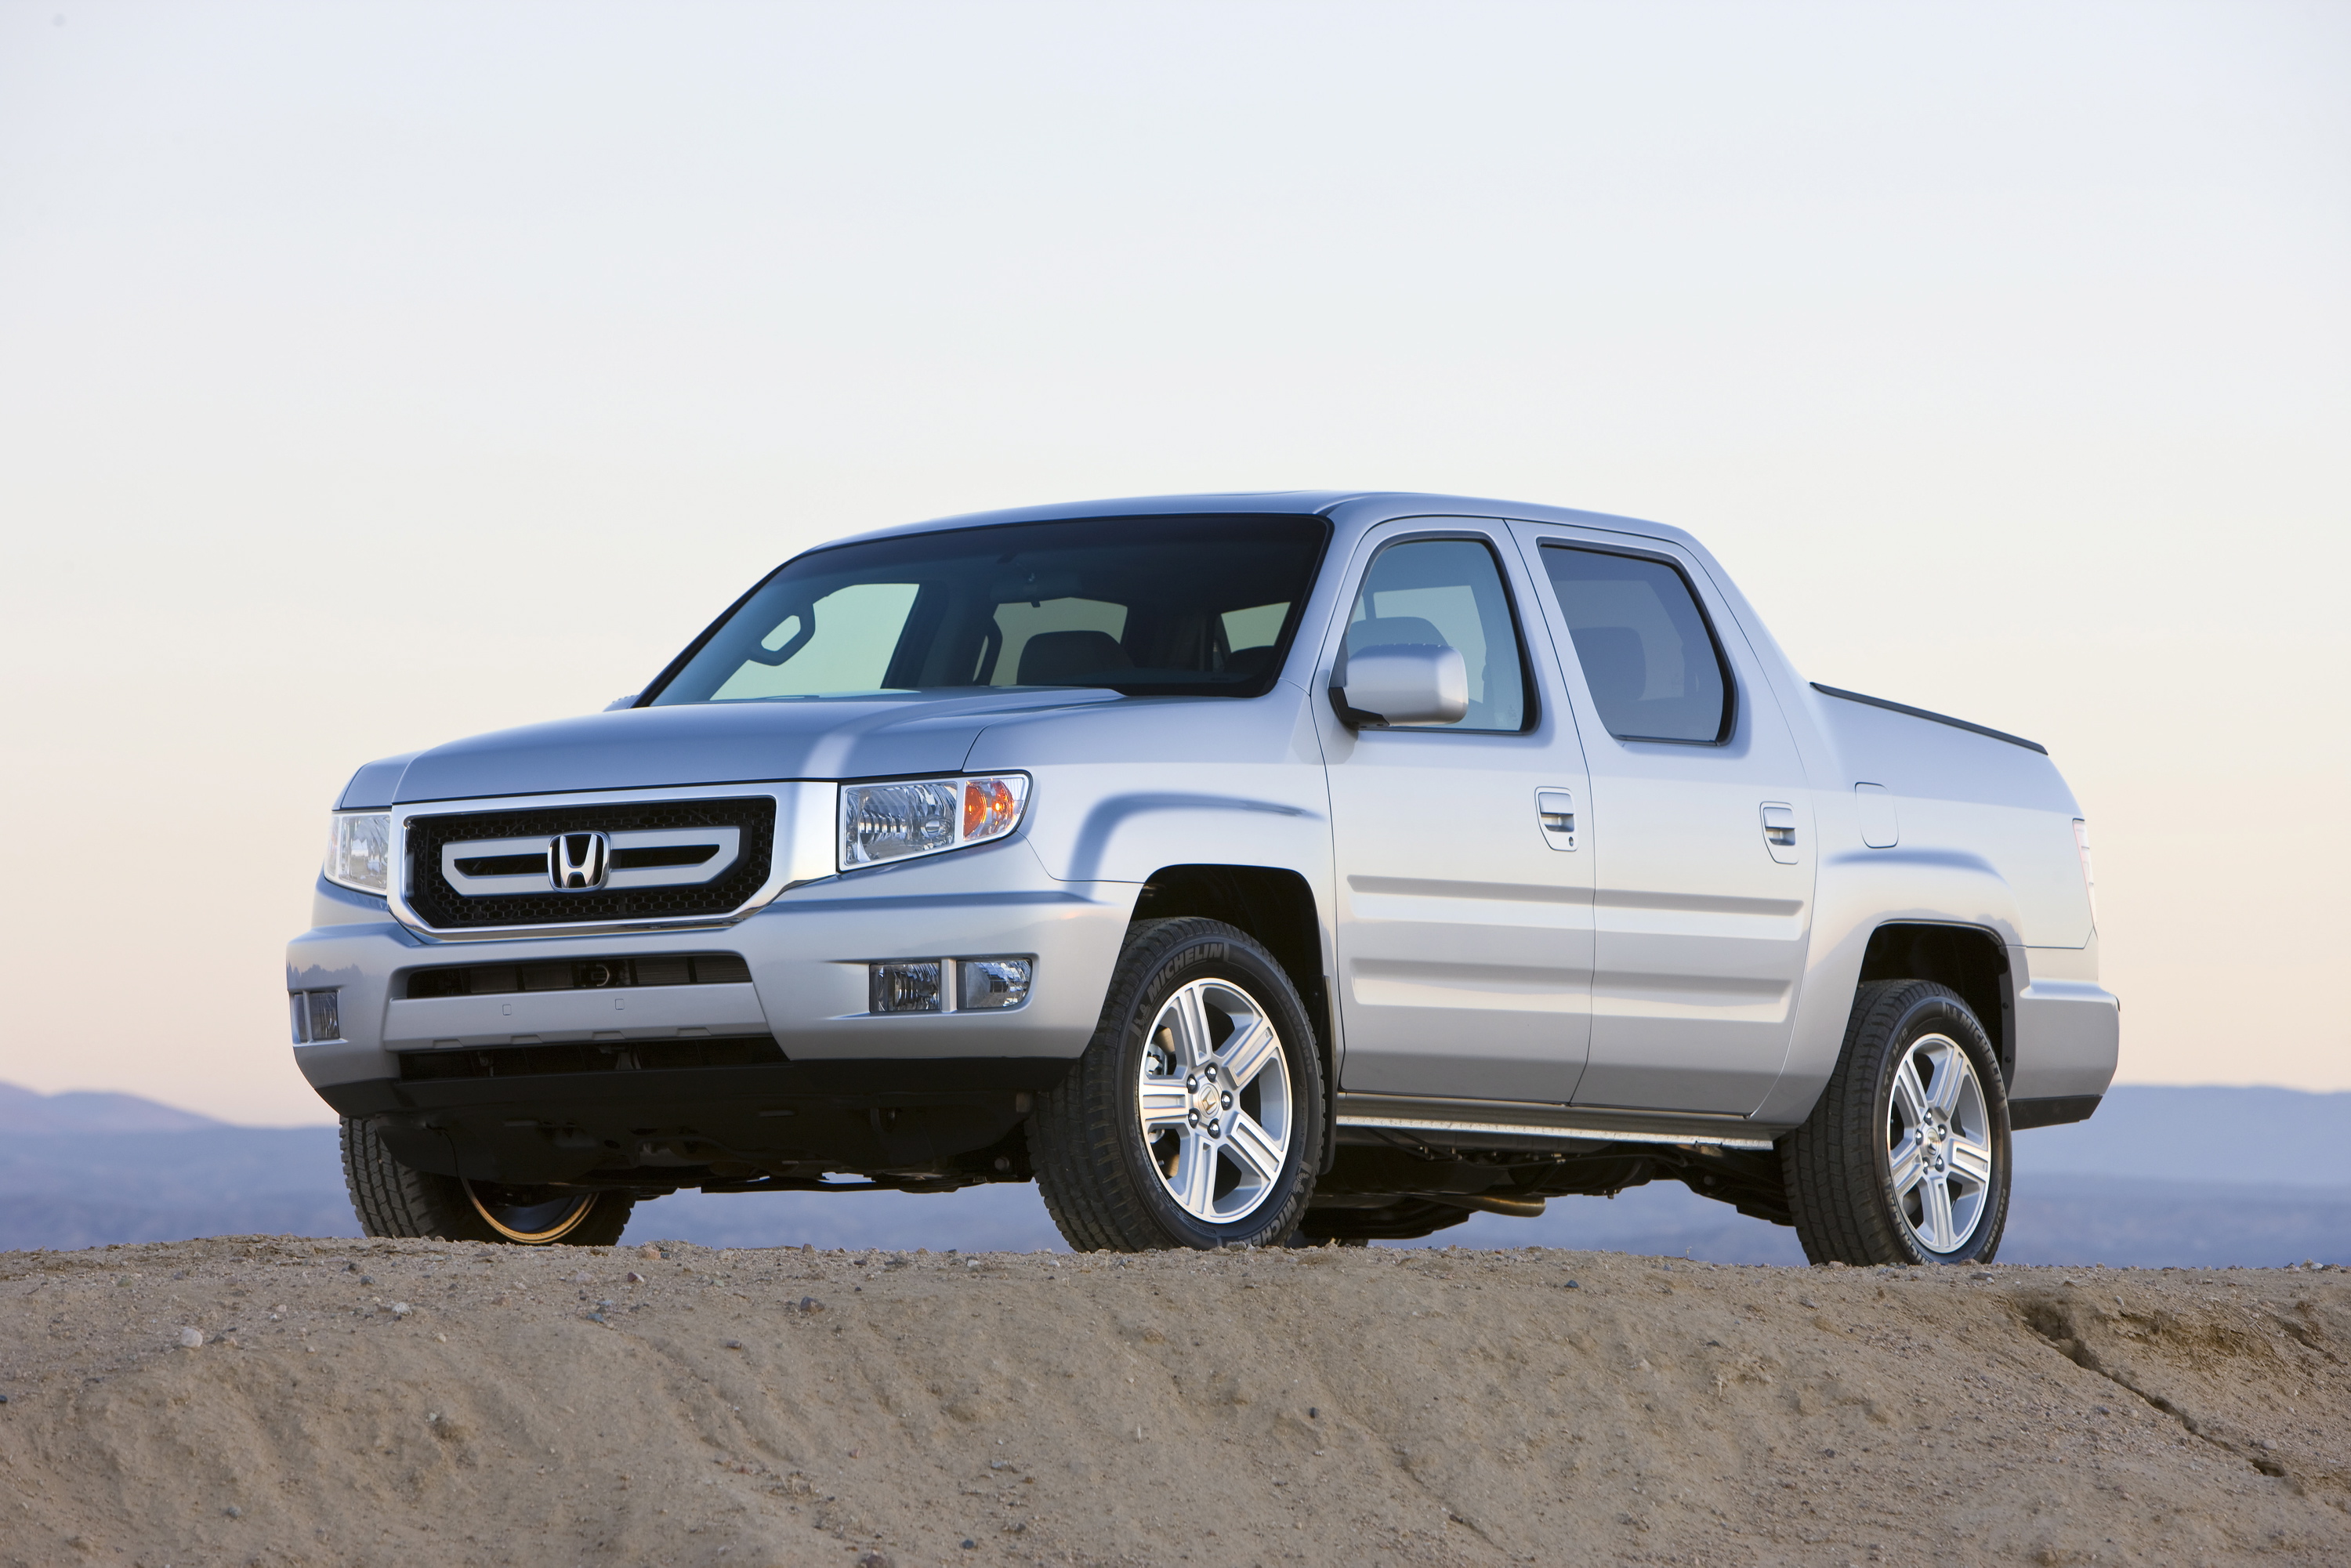 The Best Used Honda Ridgeline Pickup Truck Years: Models to Hunt for and 1  to Avoid